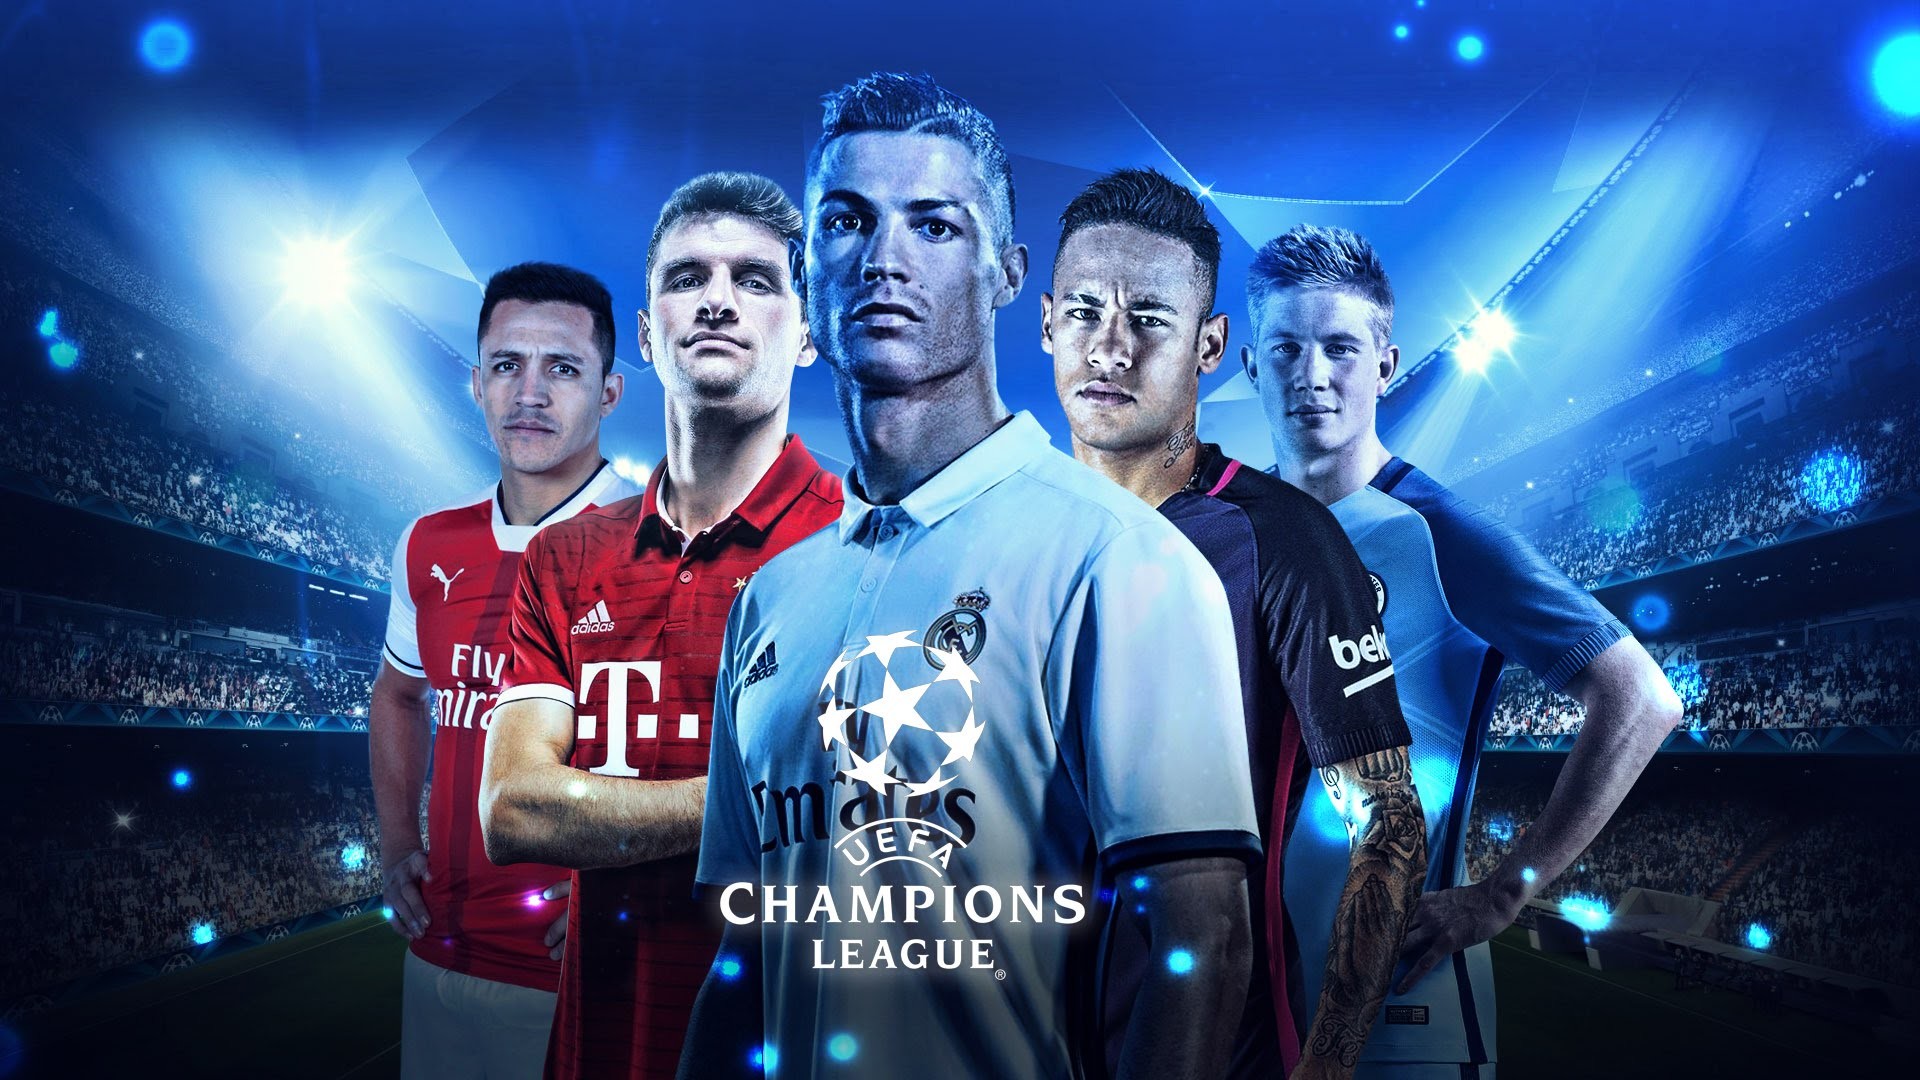 champions league wallpapers,product,football player,team,fan,performance